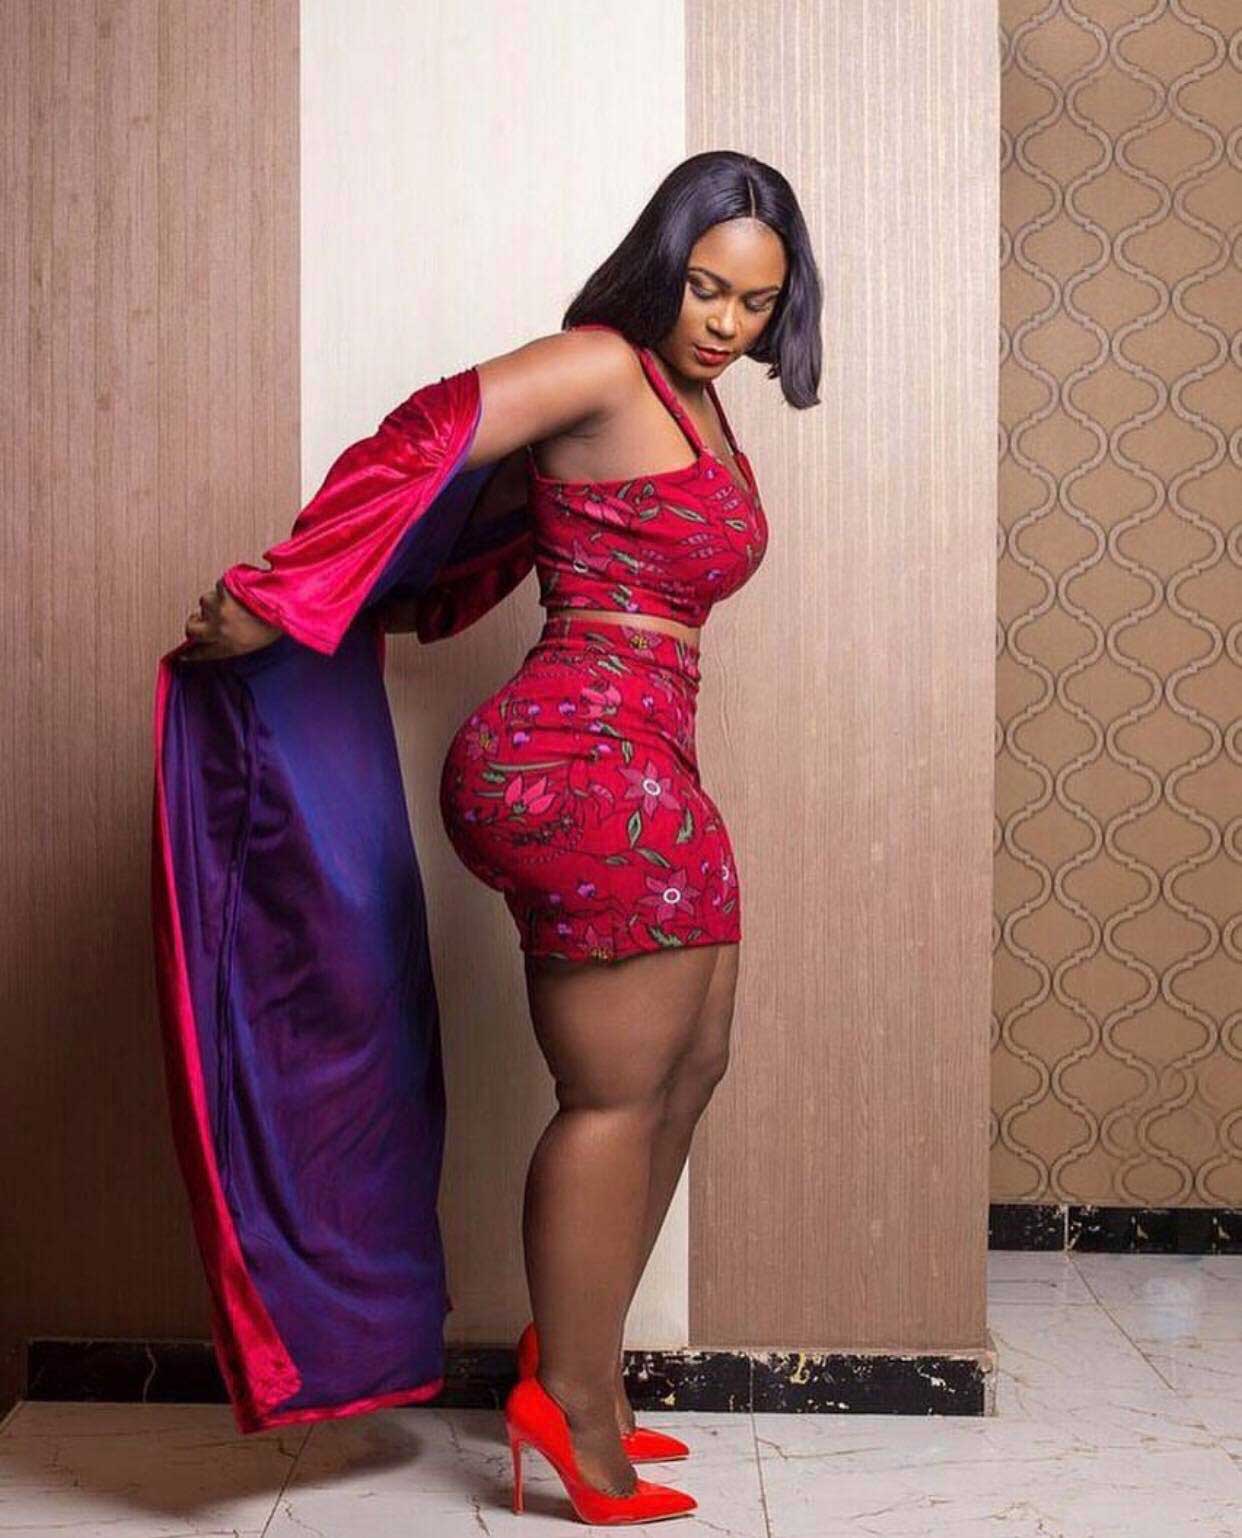 Photos of the mother of 4 who is regarded as the curvaceous 